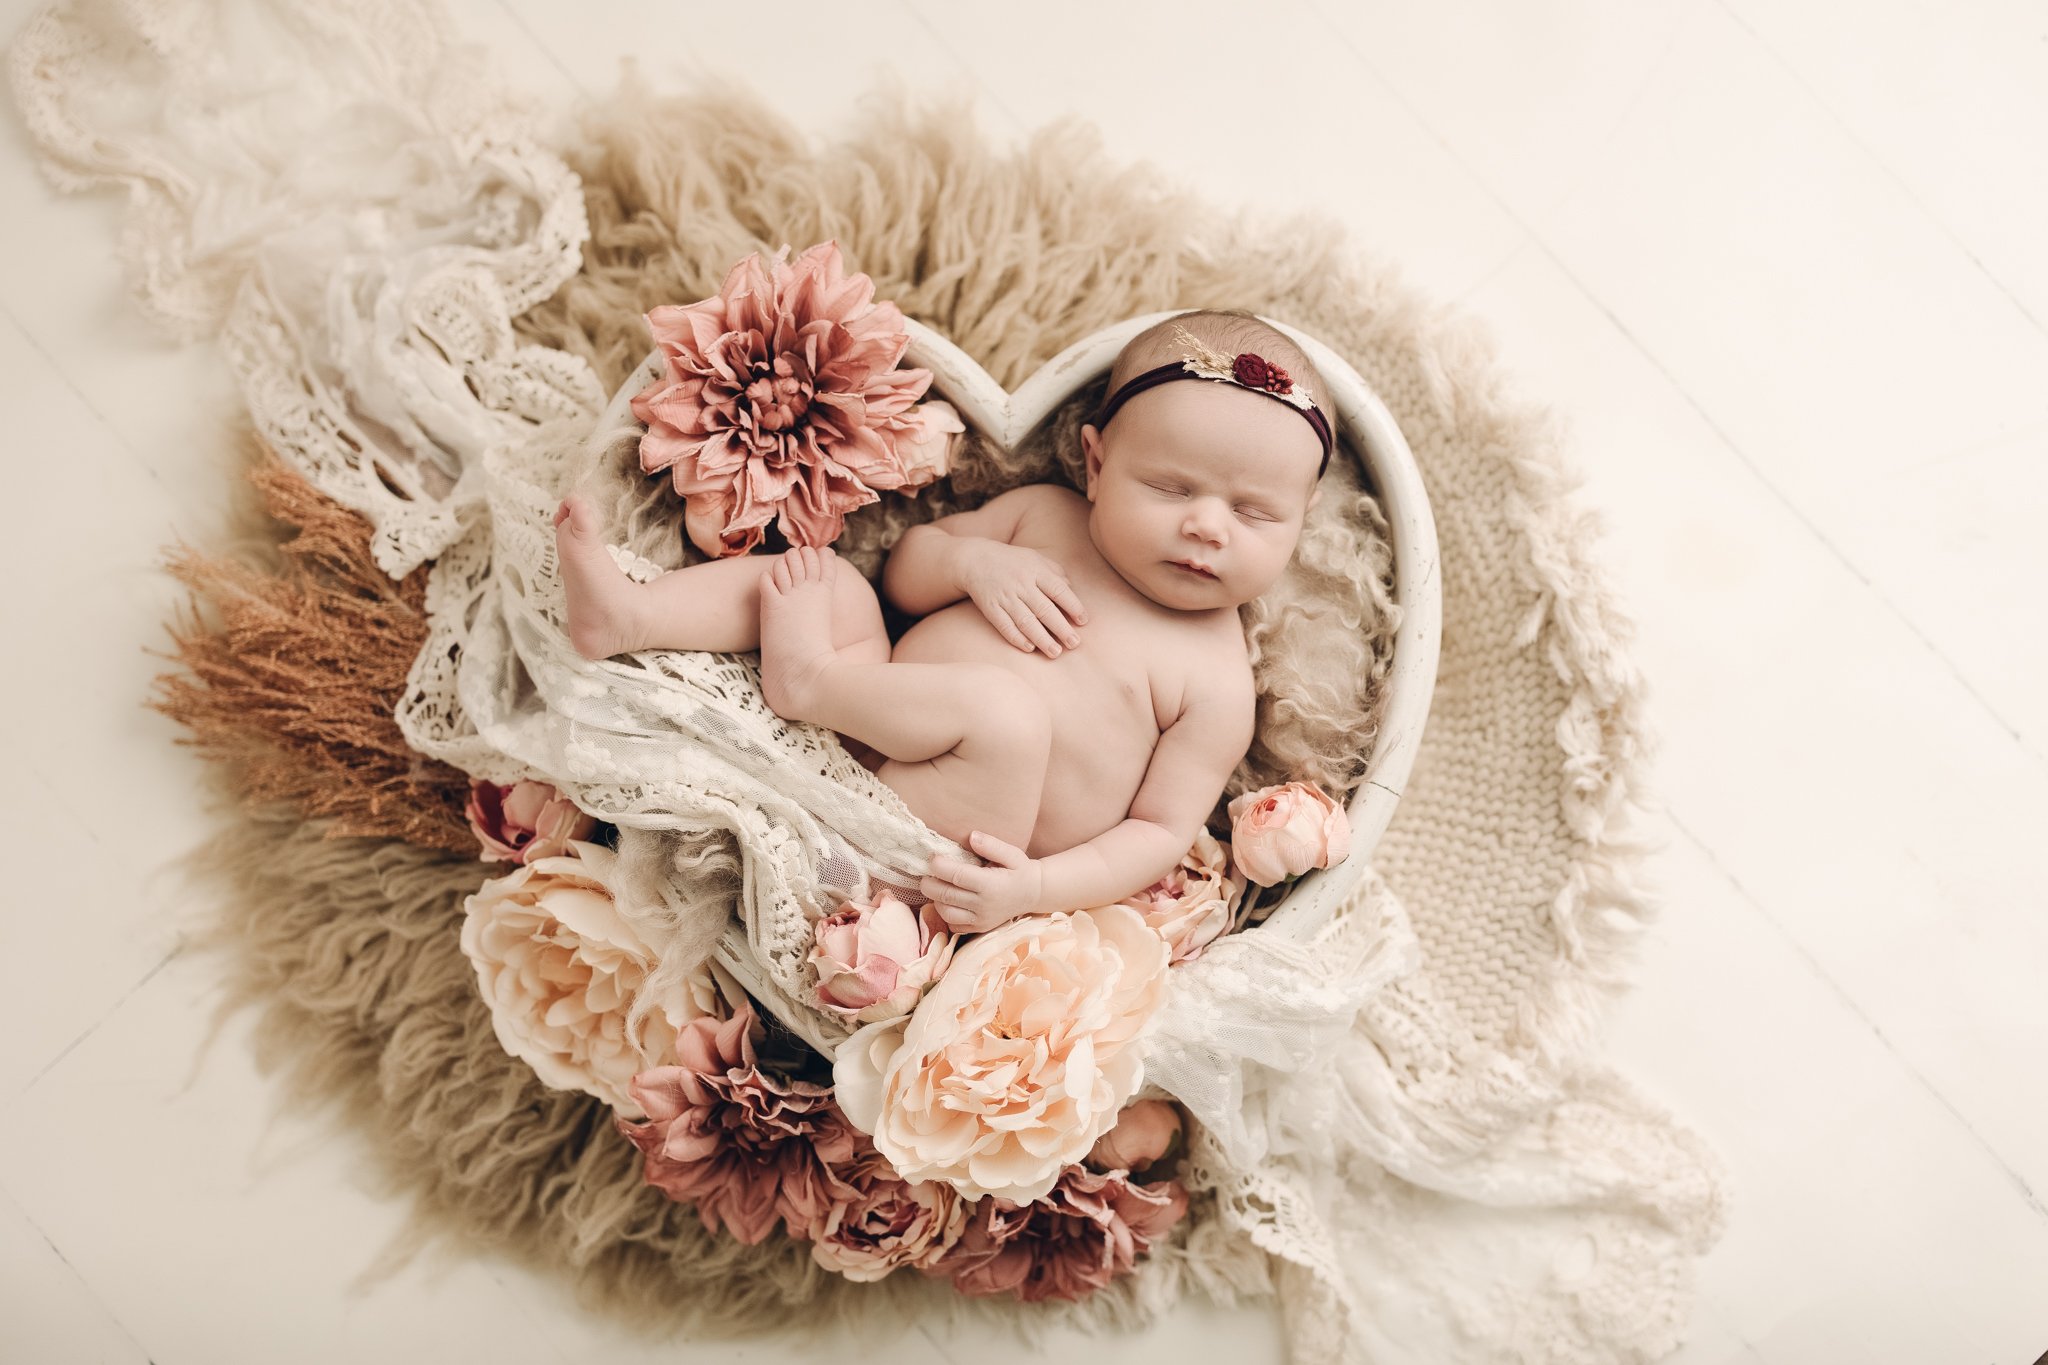 Posed_Studio_Newborn_Photographer_Second_Child_Siblings_Baby_Girl_Pink_Floral_by_Christie_Leigh_Photo_Champion_OH_Ohio_Trumbull_County-8.jpg